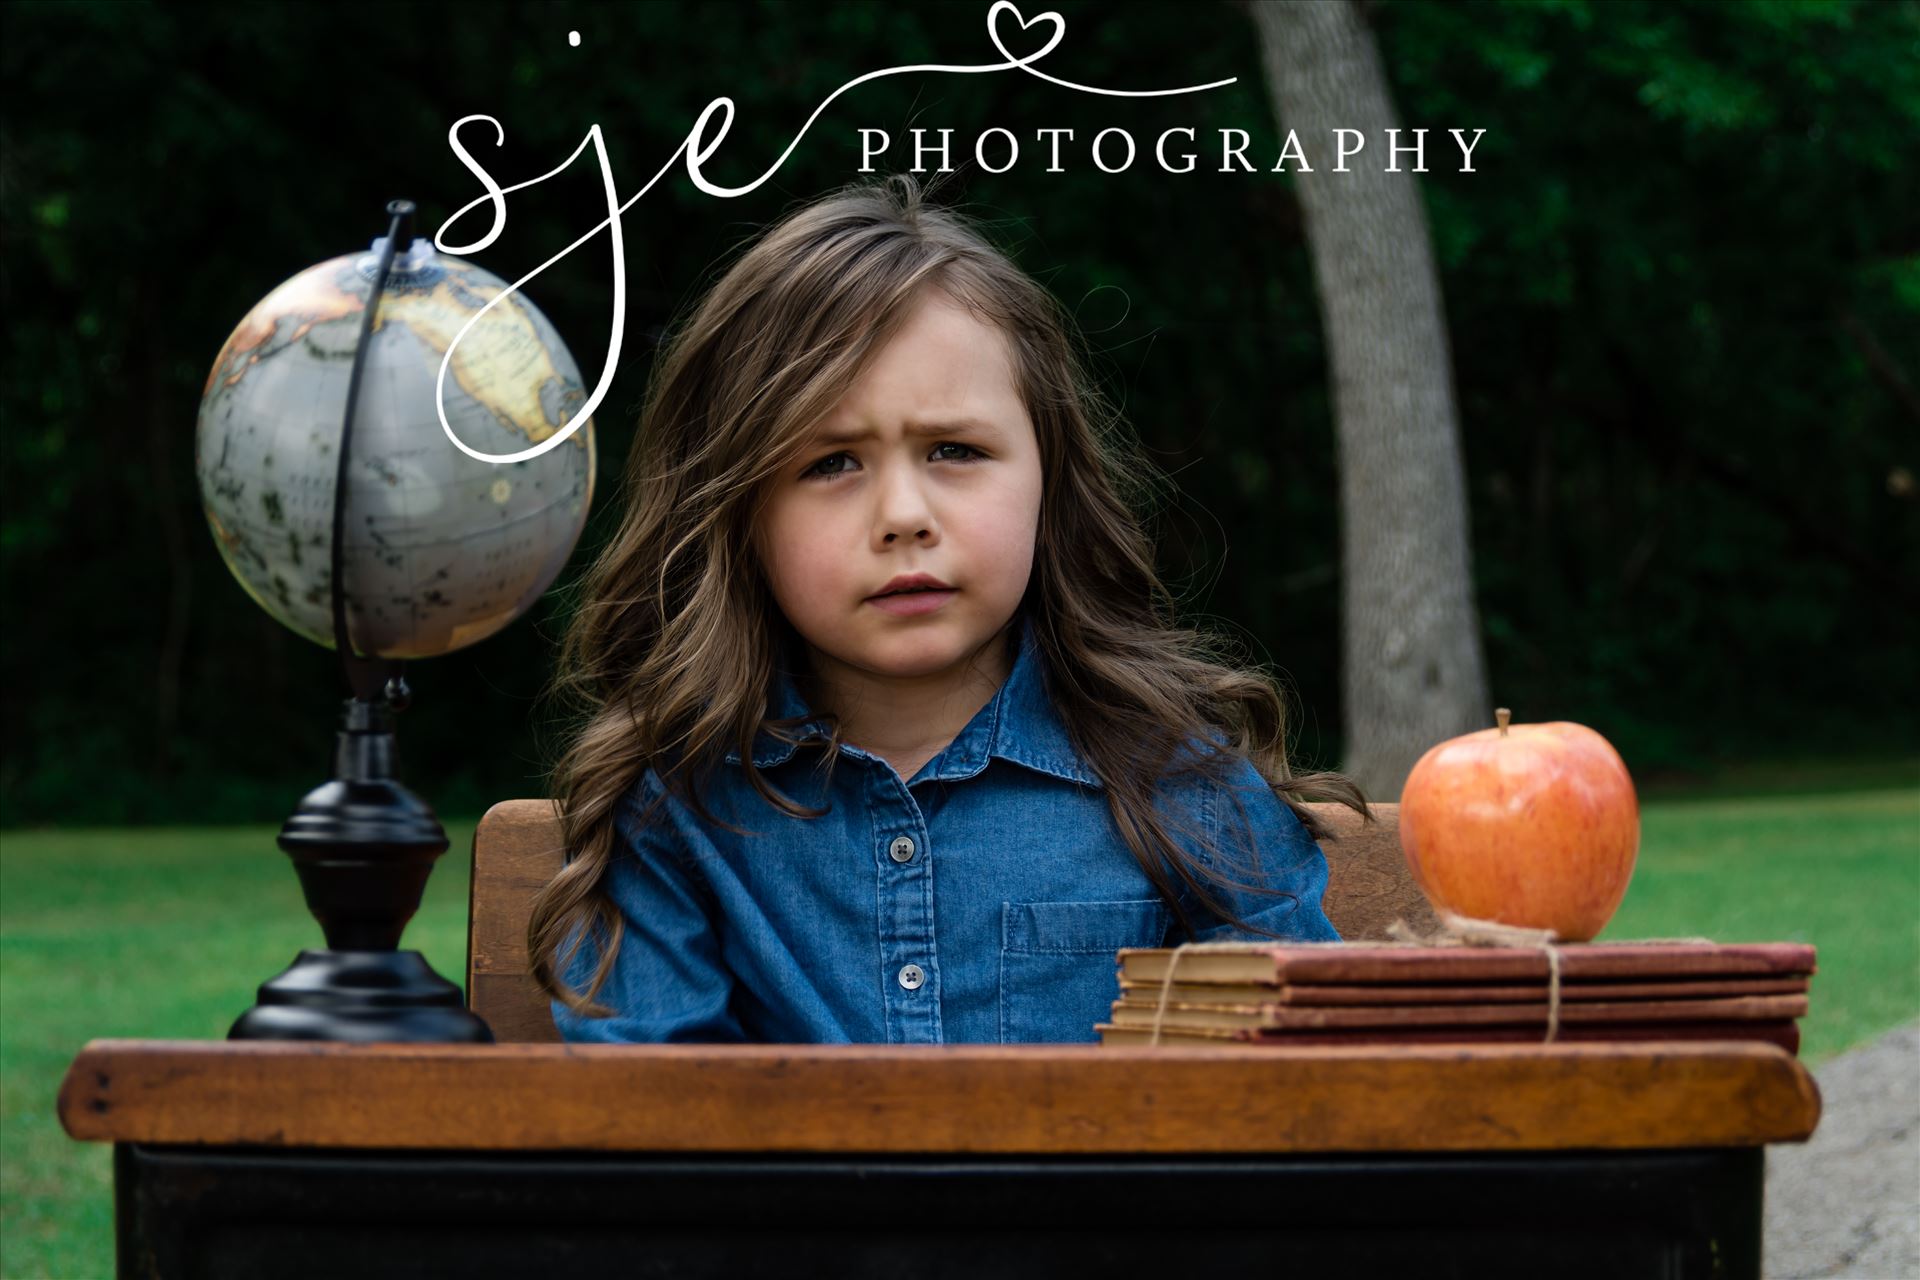 Paisley Baughn  by SJE Photography